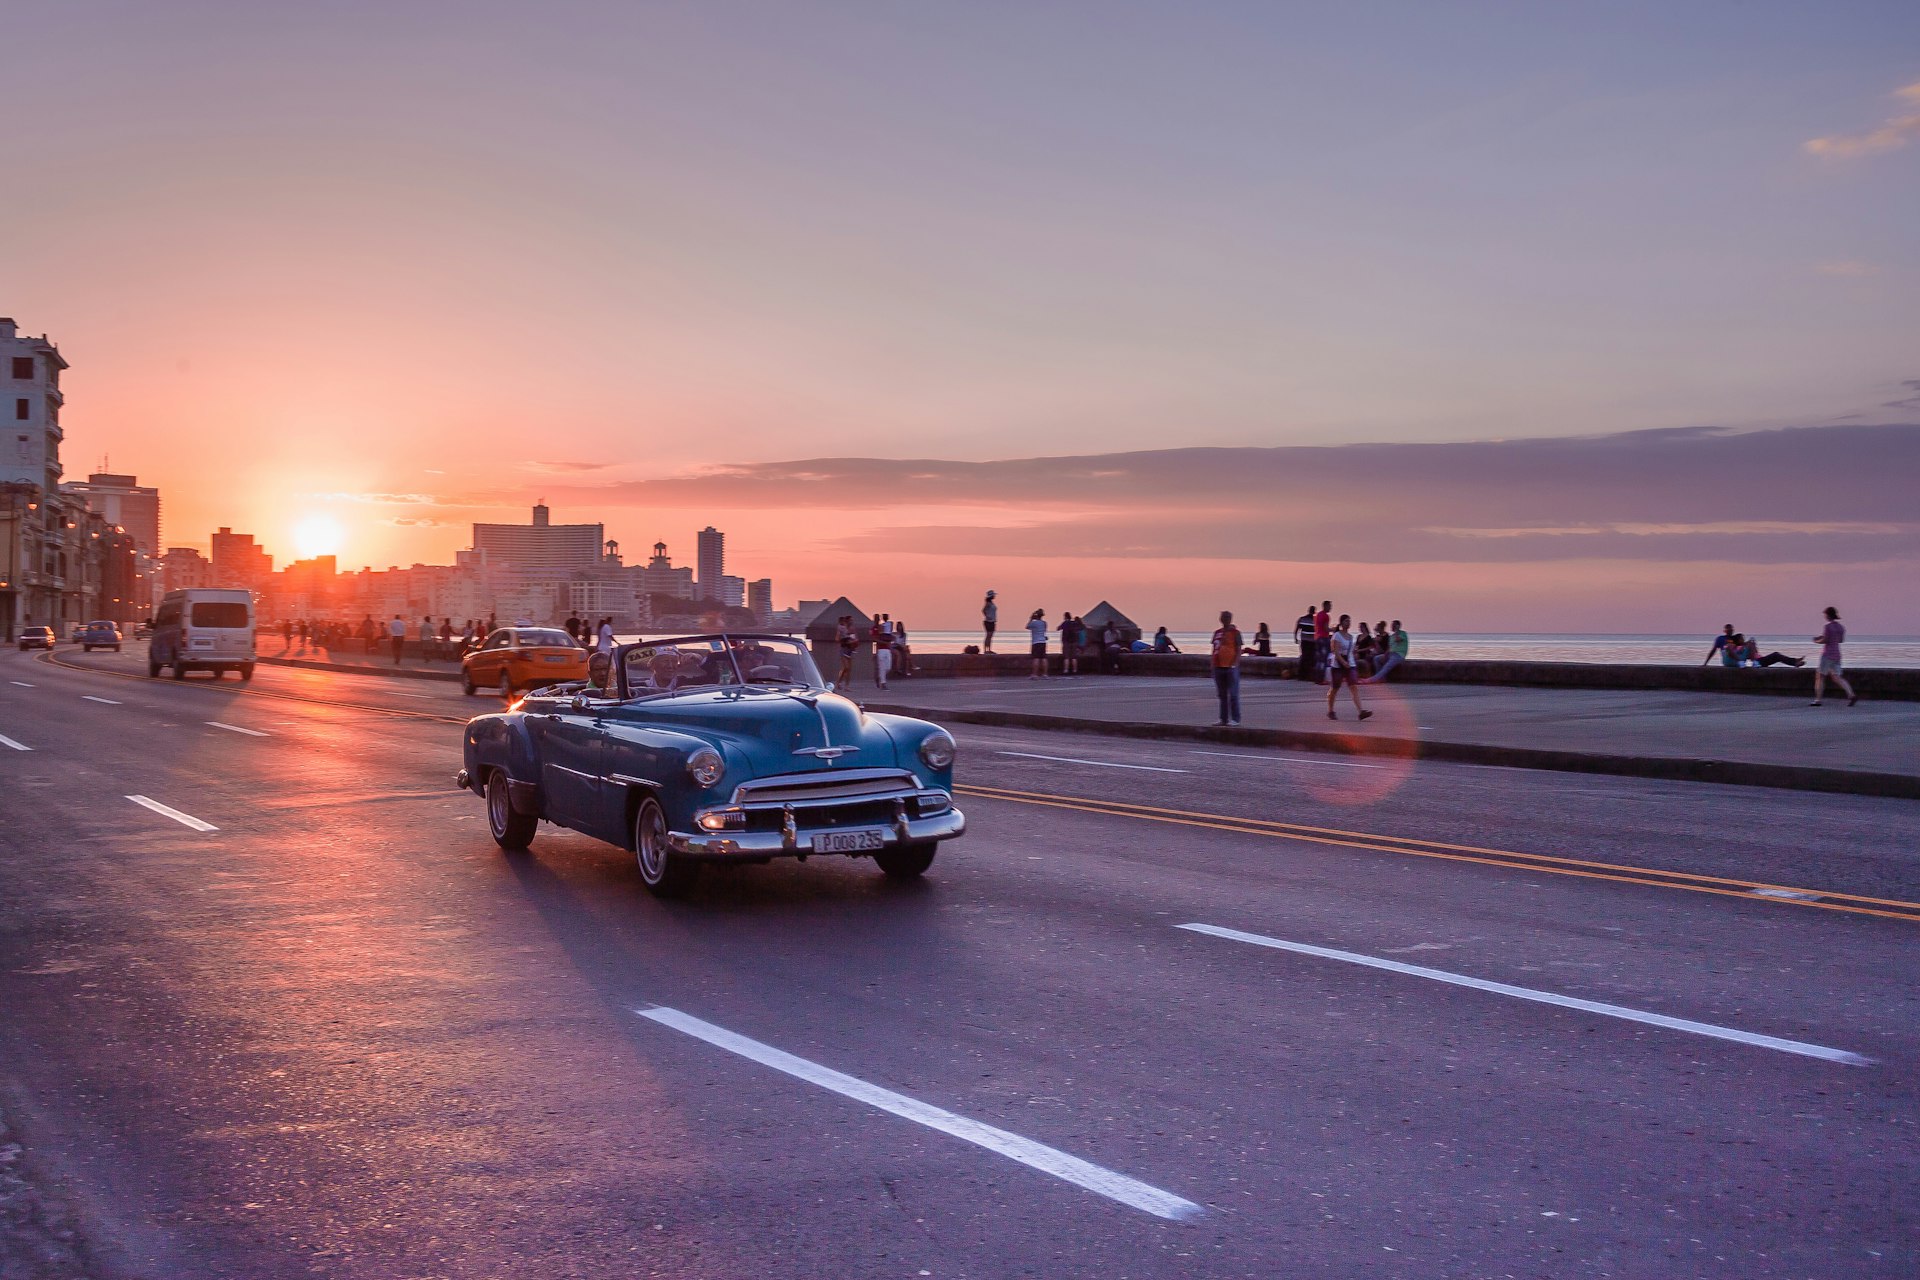 sunset on El Malecon at the seaside while an old timer taxi car passes by